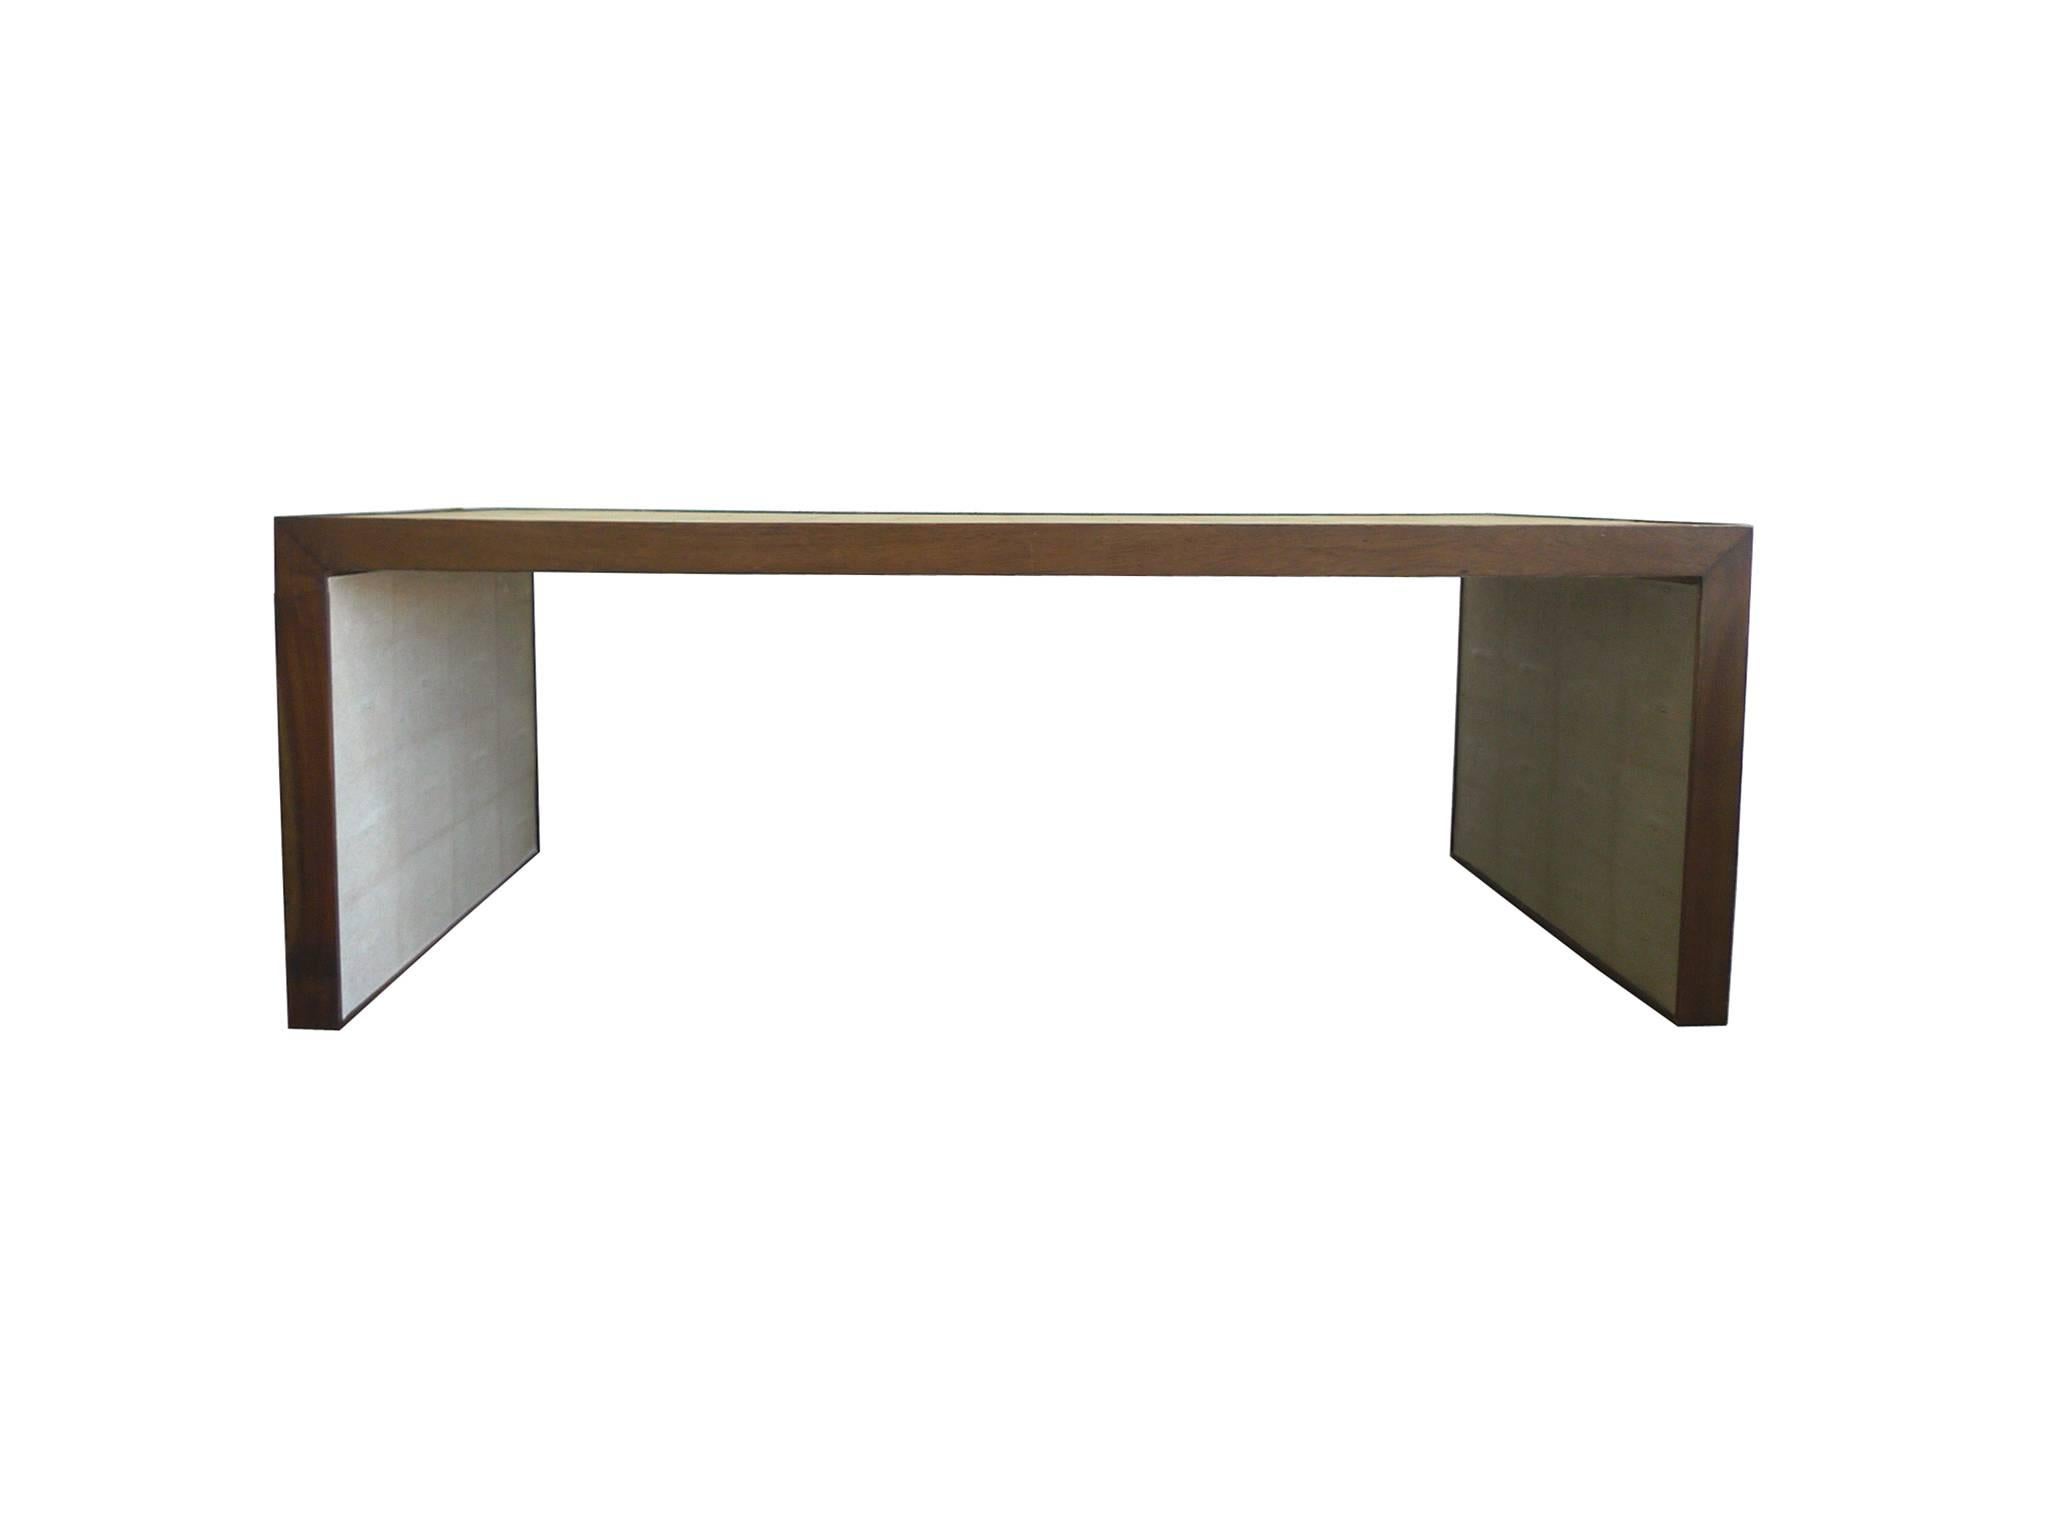 This set of nesting tables is comprised of one rectangular coffee table and a pair of smaller, square side tables. The frame is walnut wrapped in a beige, tactile shagreen. The walnut is visible on the sides as an elegant brown border.

Each side